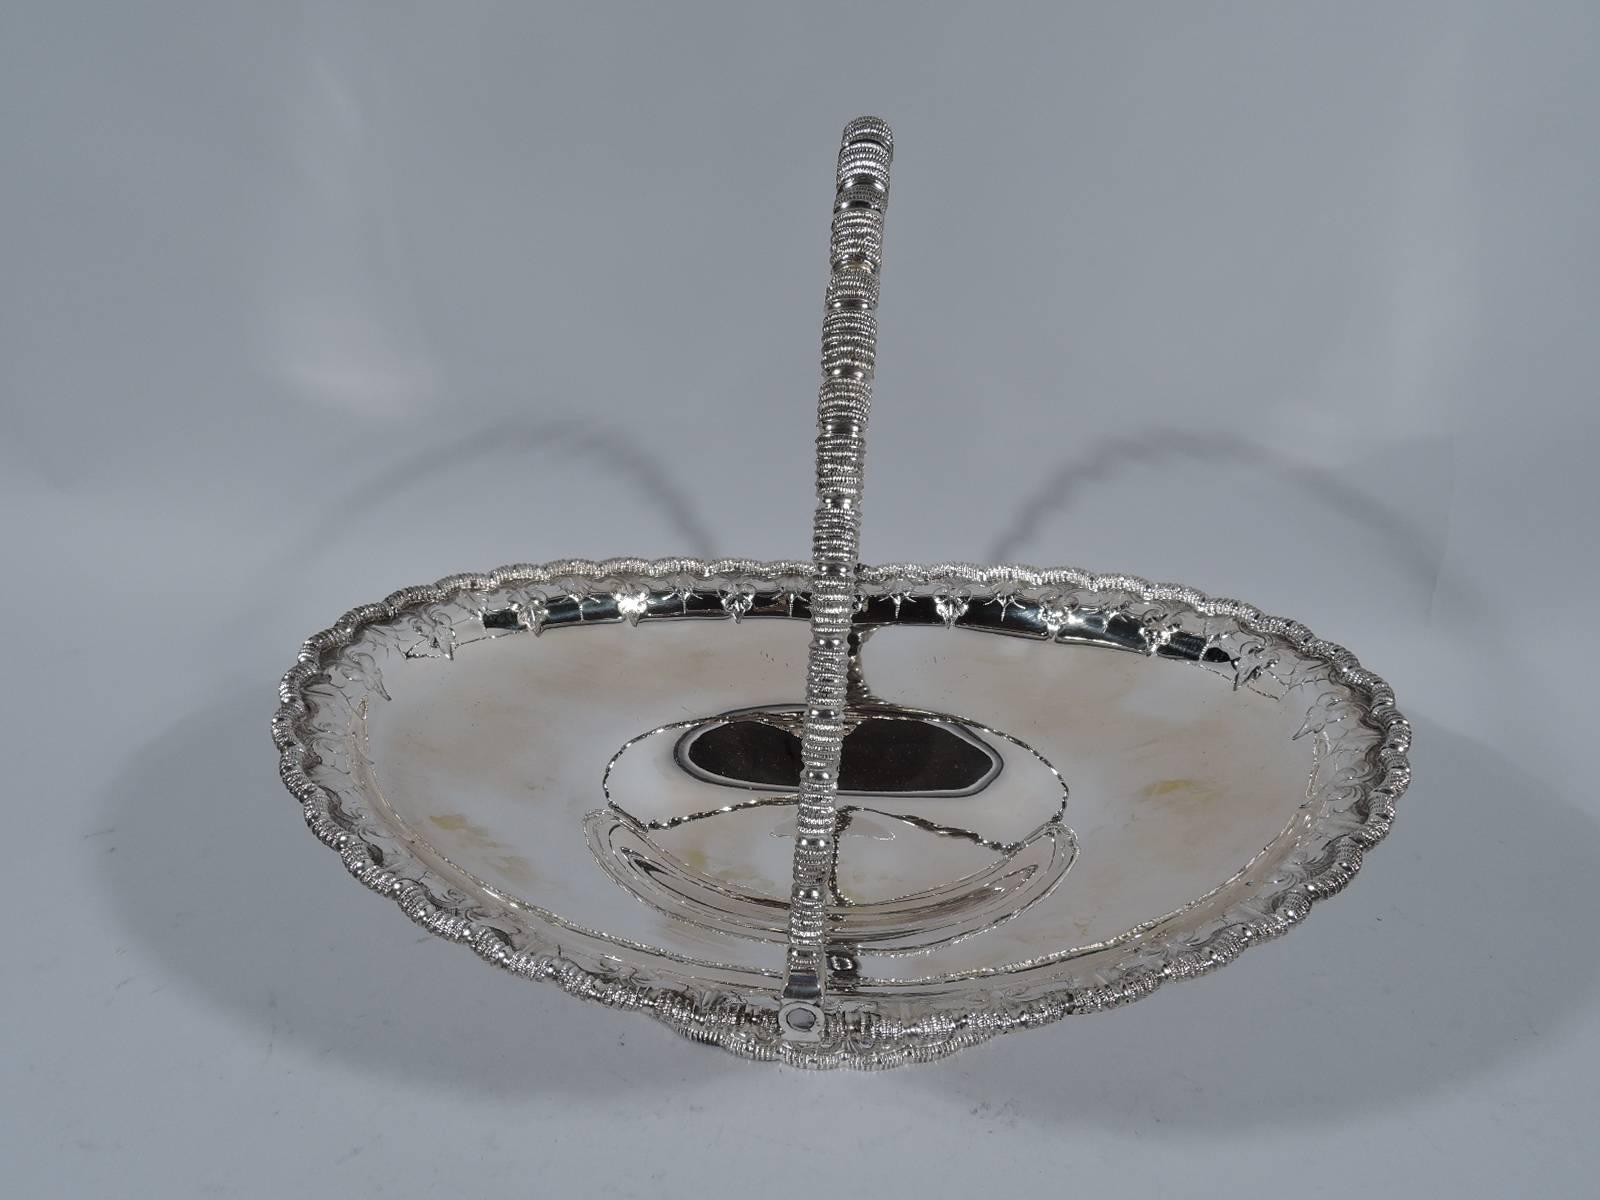 Sterling silver basket. Made by Grosjean & Woodward, 1854-65, for Tiffany & Co., both in New York. Shallow and oval body on raised foot. Rims scalloped and gadrooned as is swing handle. Engraved alternating leaves and fleurs de lis. Early hallmark